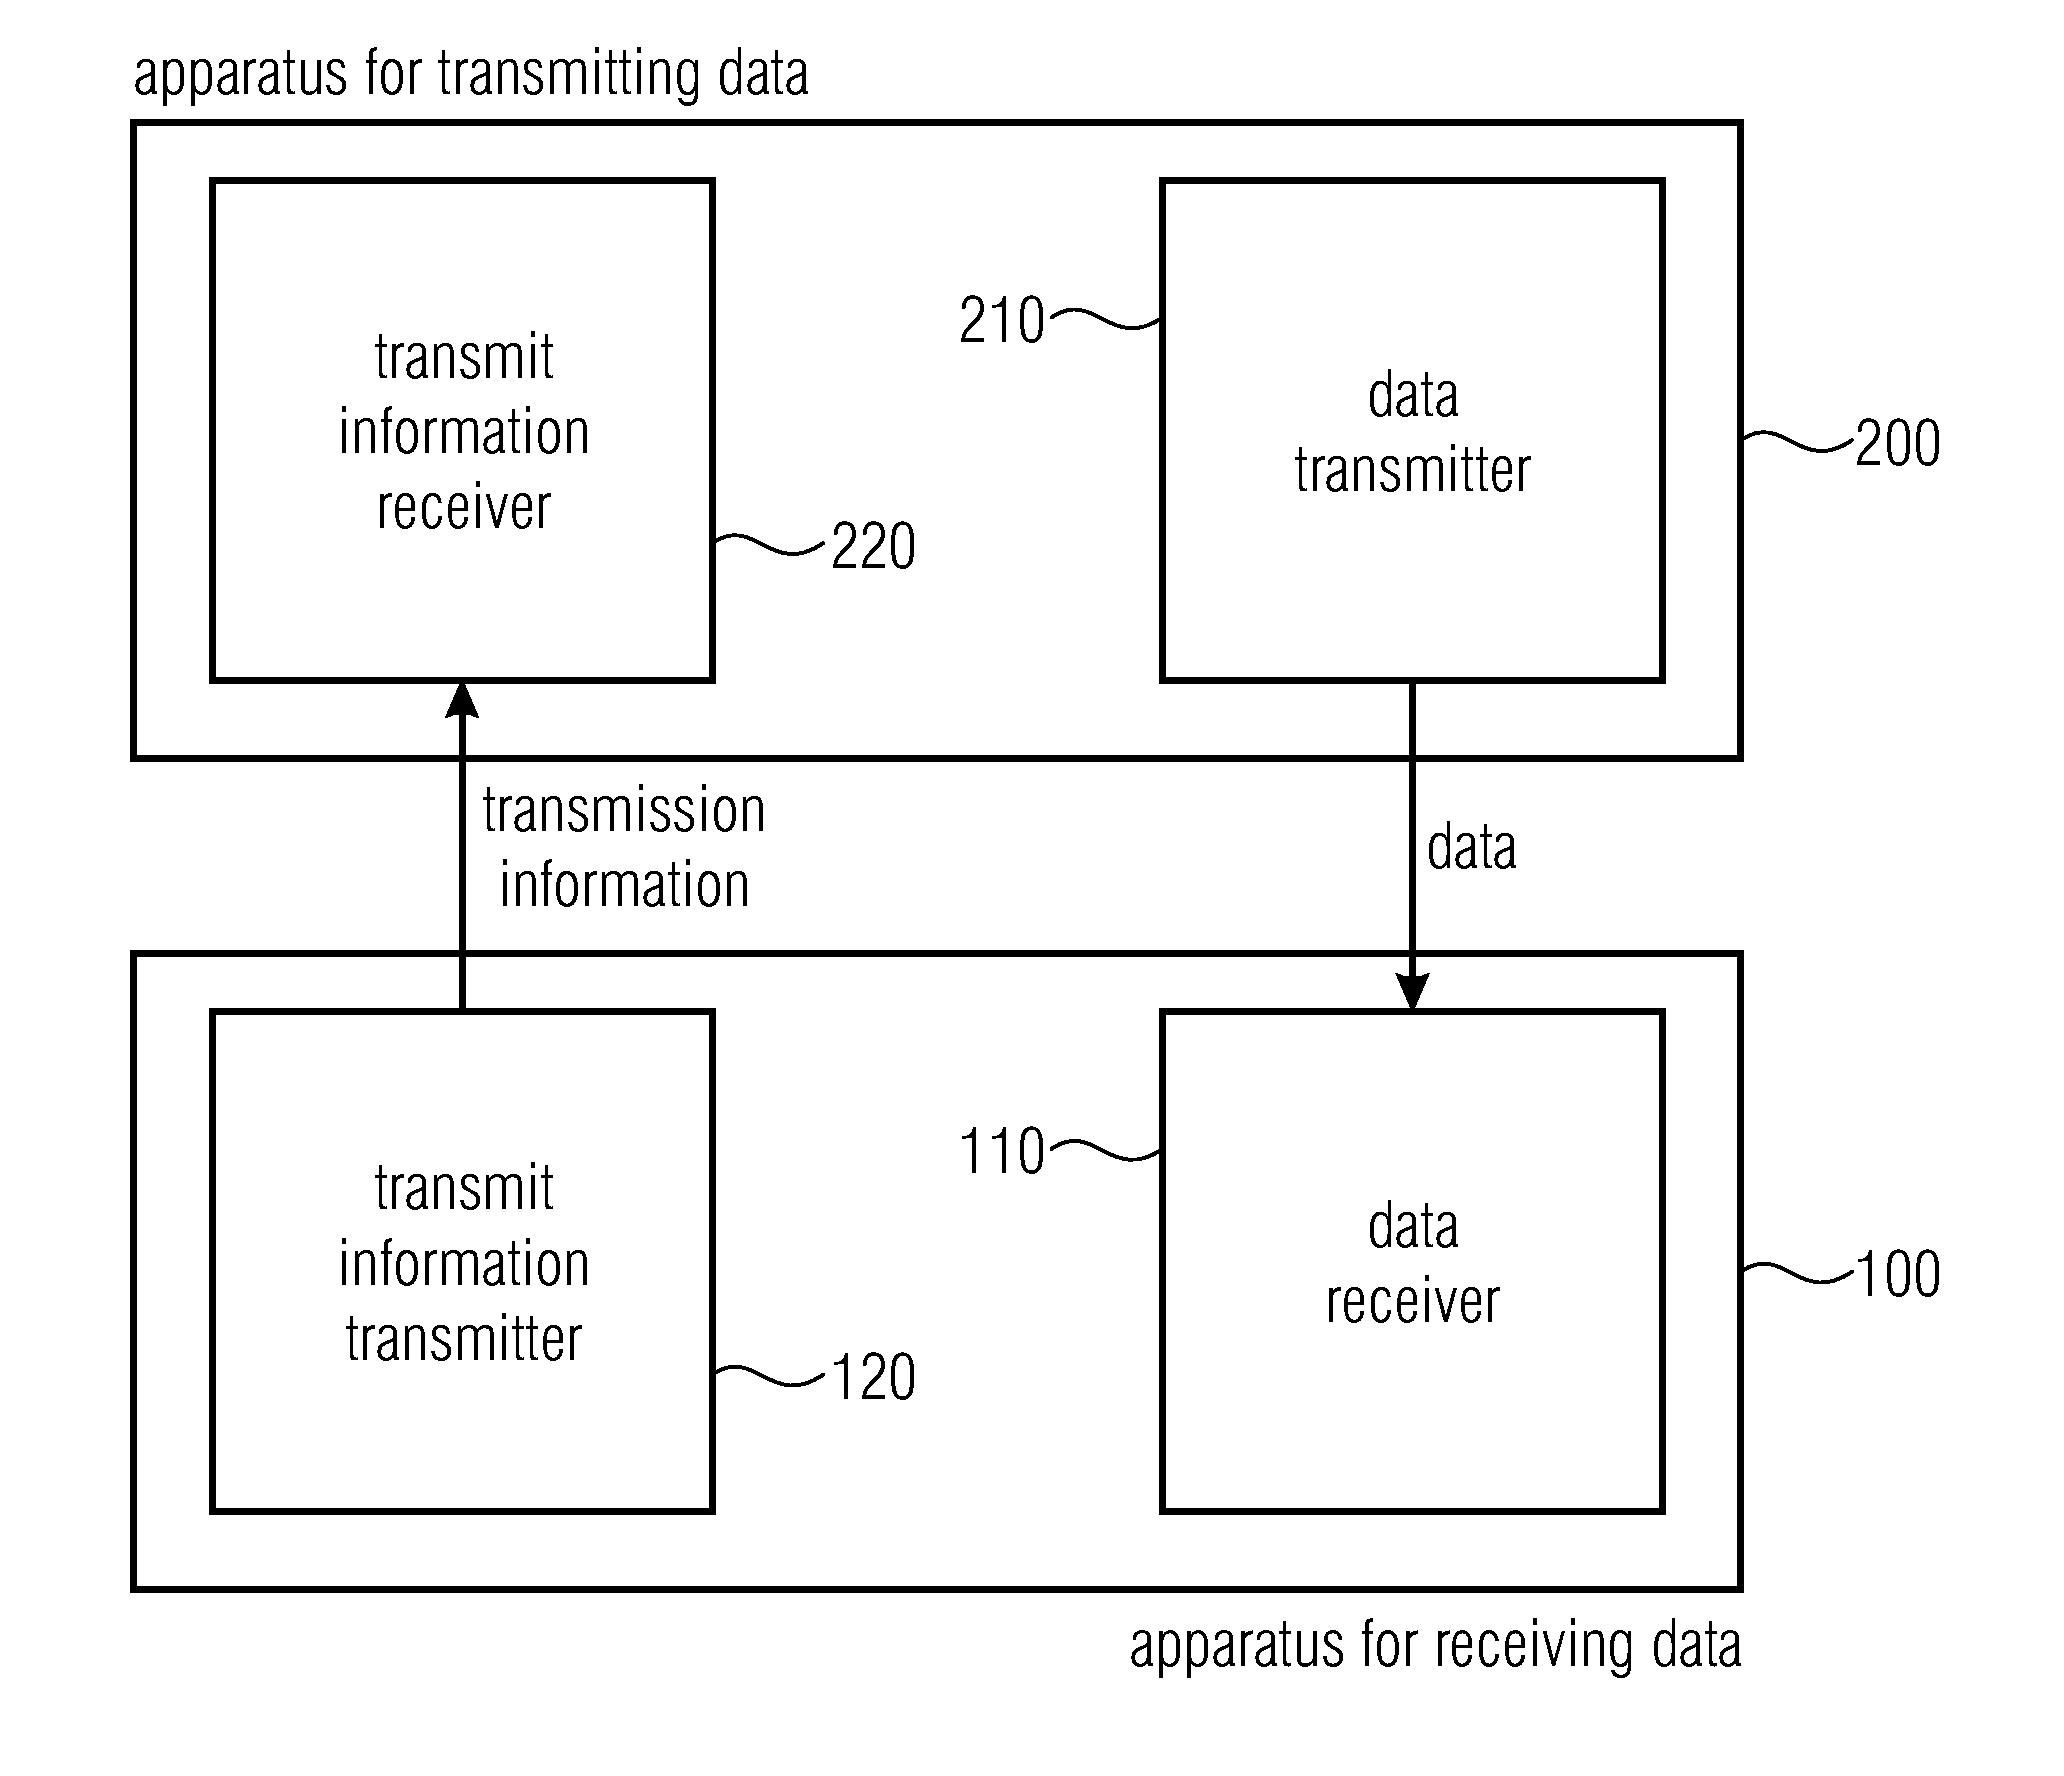 Apparatus and method realizing a cognitive enabler for unlicensed band communication using licensed feedback in multi-band radio channels